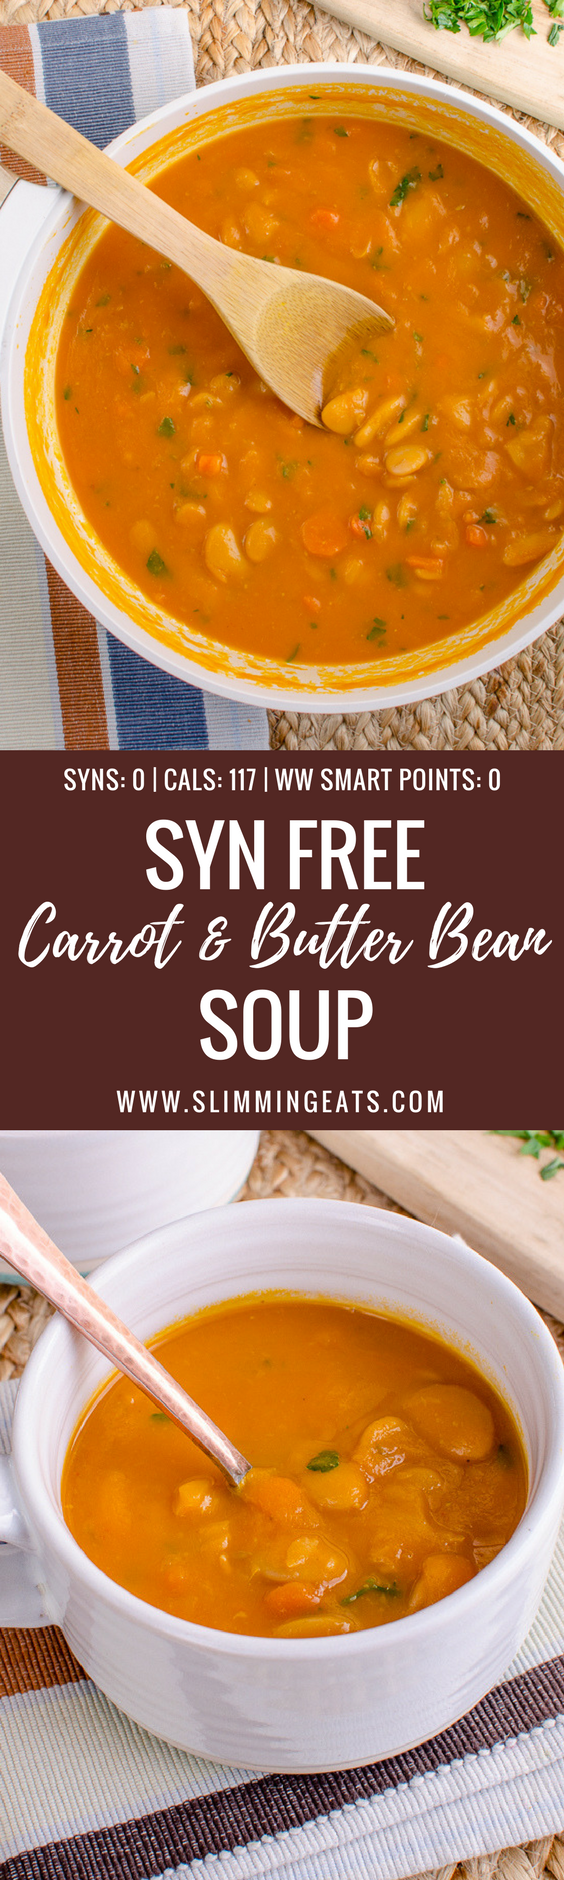 Looking for a simple, quick and delicious soup to make? This Syn Free Carrot and Butter Bean Soup is super easy to make and perfectly comforting | gluten free, dairy free, vegan, Slimming World and Weight Watchers friendly | www.SlimmingEats.com